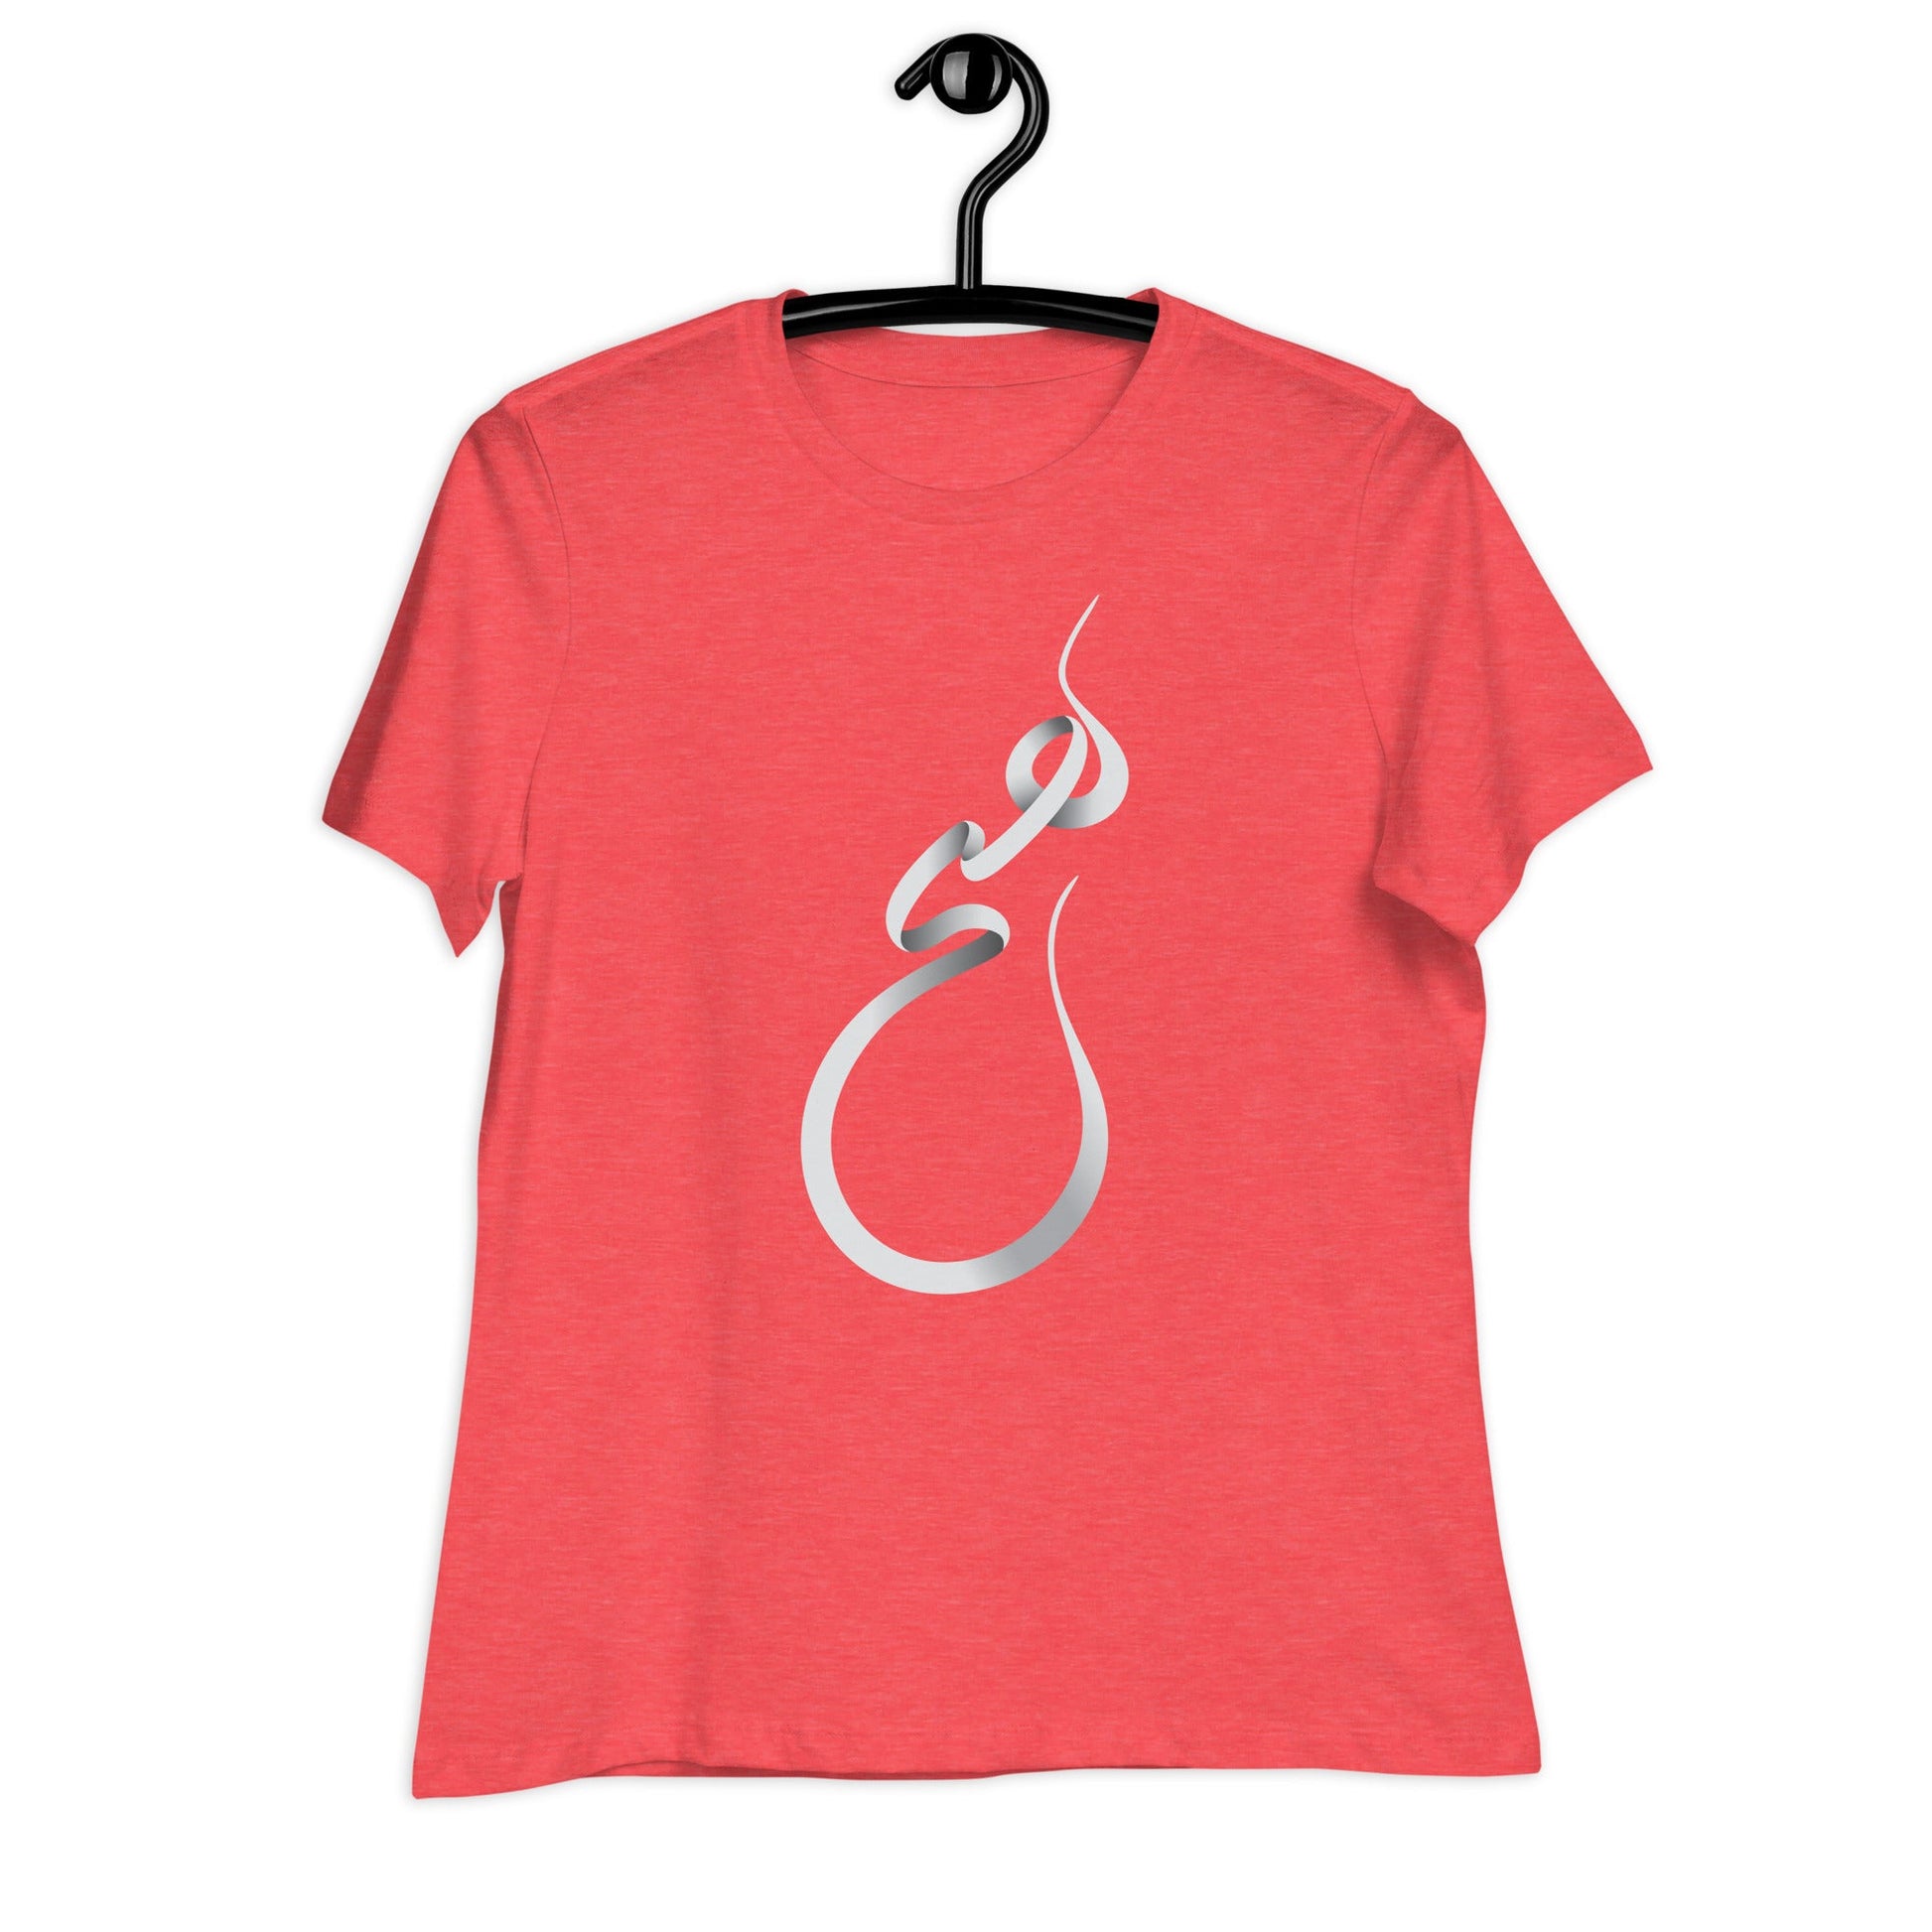 womens-relaxed-tshirt-nothing-hich-heather-red